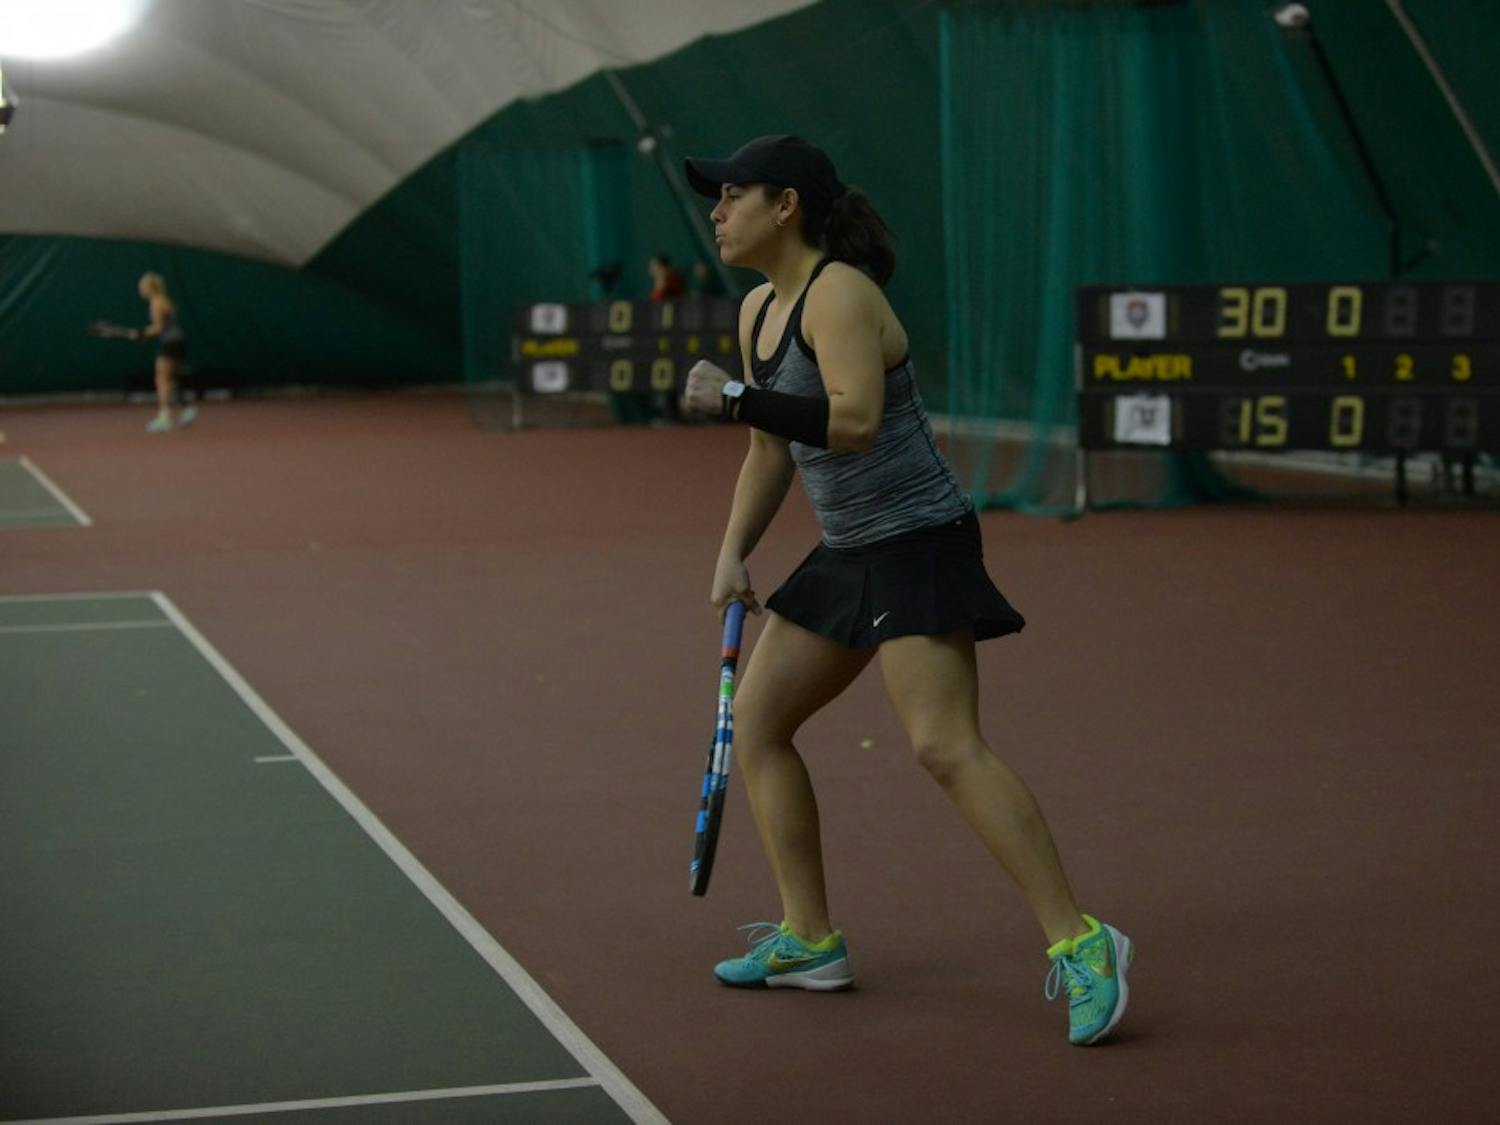 UNM alum Andrea Leblanc awaits an oncoming tennis ball during a match against Utah on Feb. 20, 2016. Leblanc is one of the three UNM students advocating for earthquake relief in her hometown of Mexico City. &nbsp;